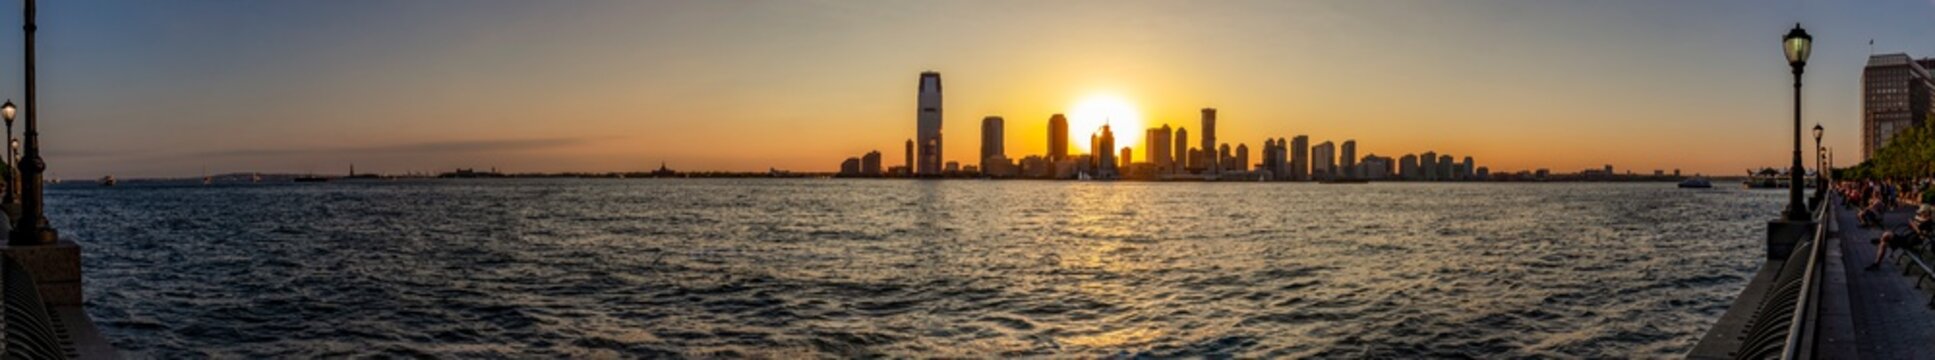 ew York / USA - 06-01-2016; A panorama photo during sunset looking from Hudson River Greenway on the Hudson River and the sun setting between the sky-line of Jersey City, New York, USA